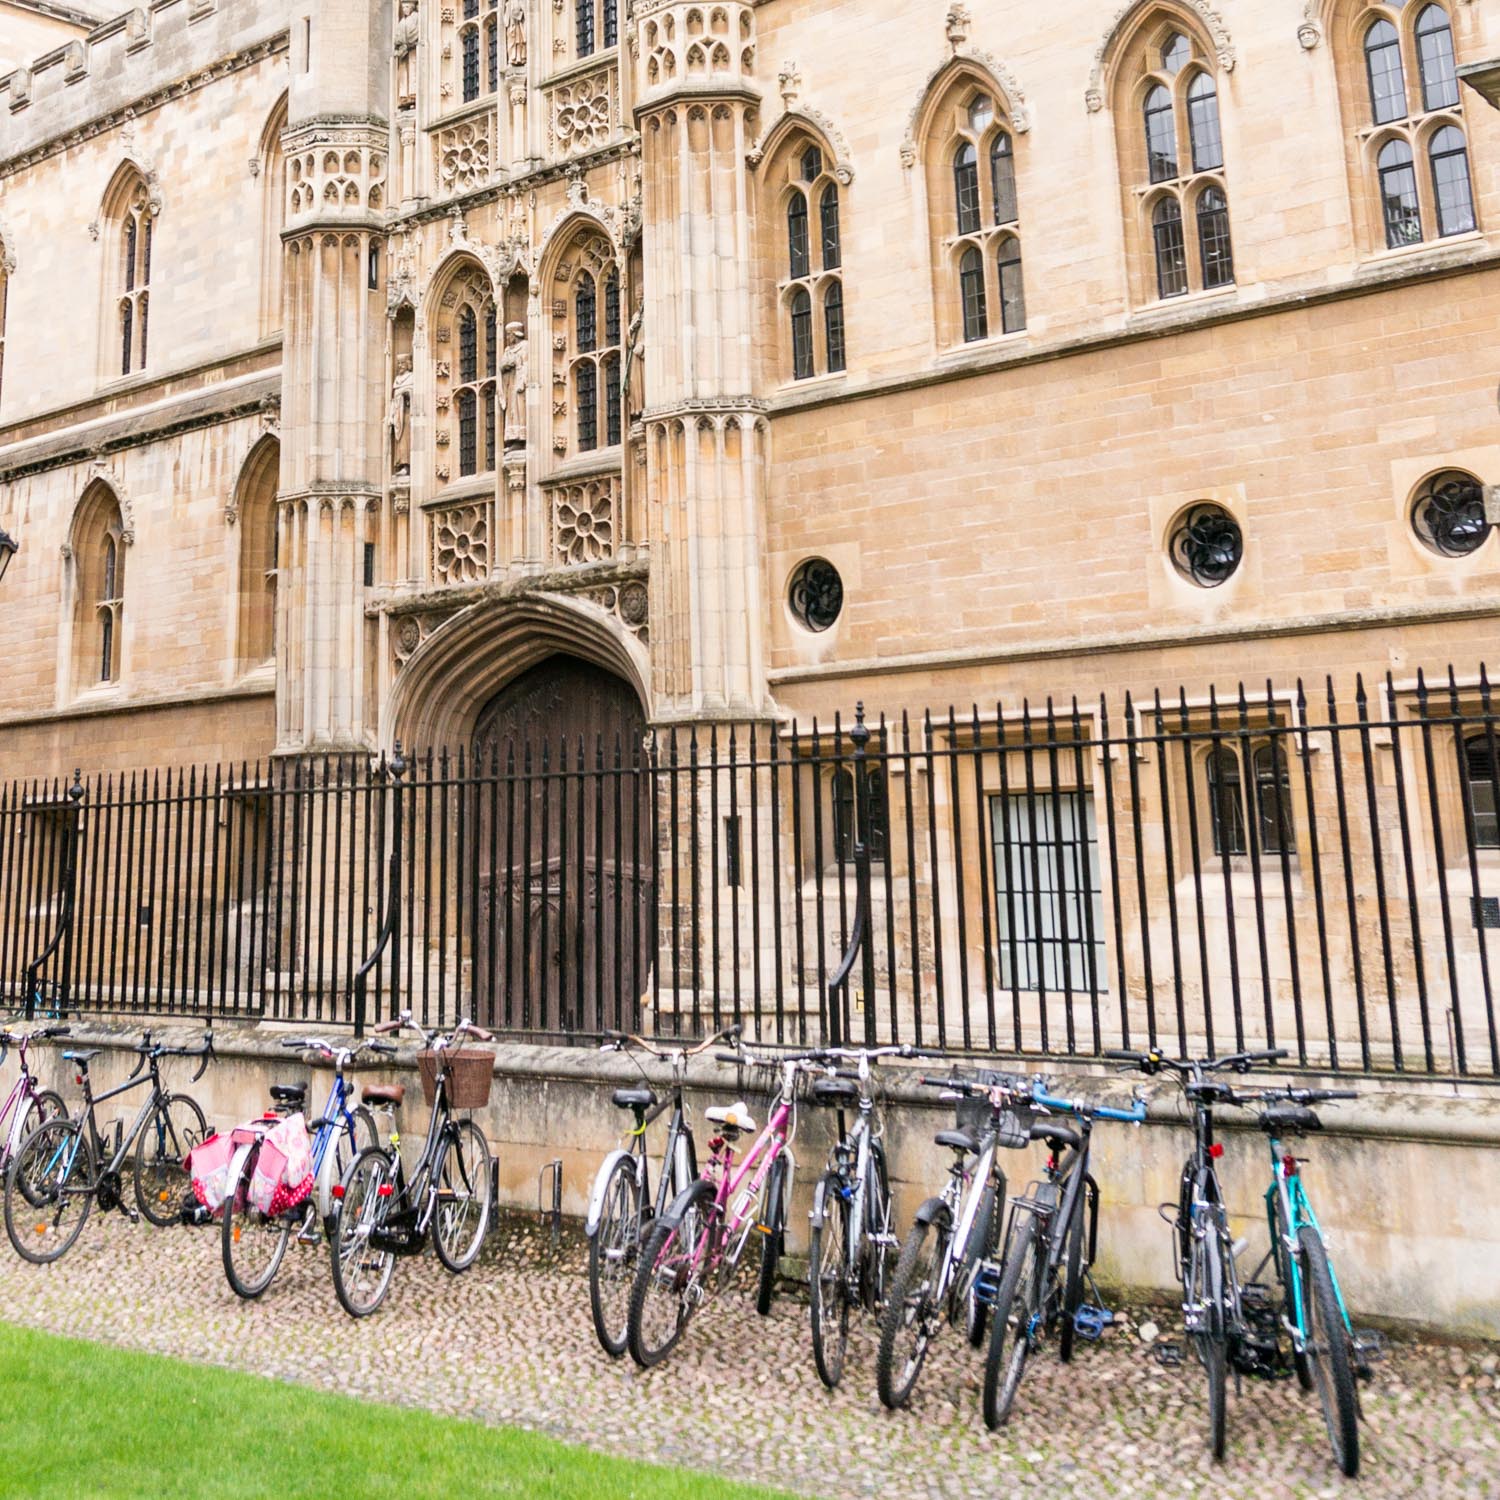 A day out in Cambridge – part 1